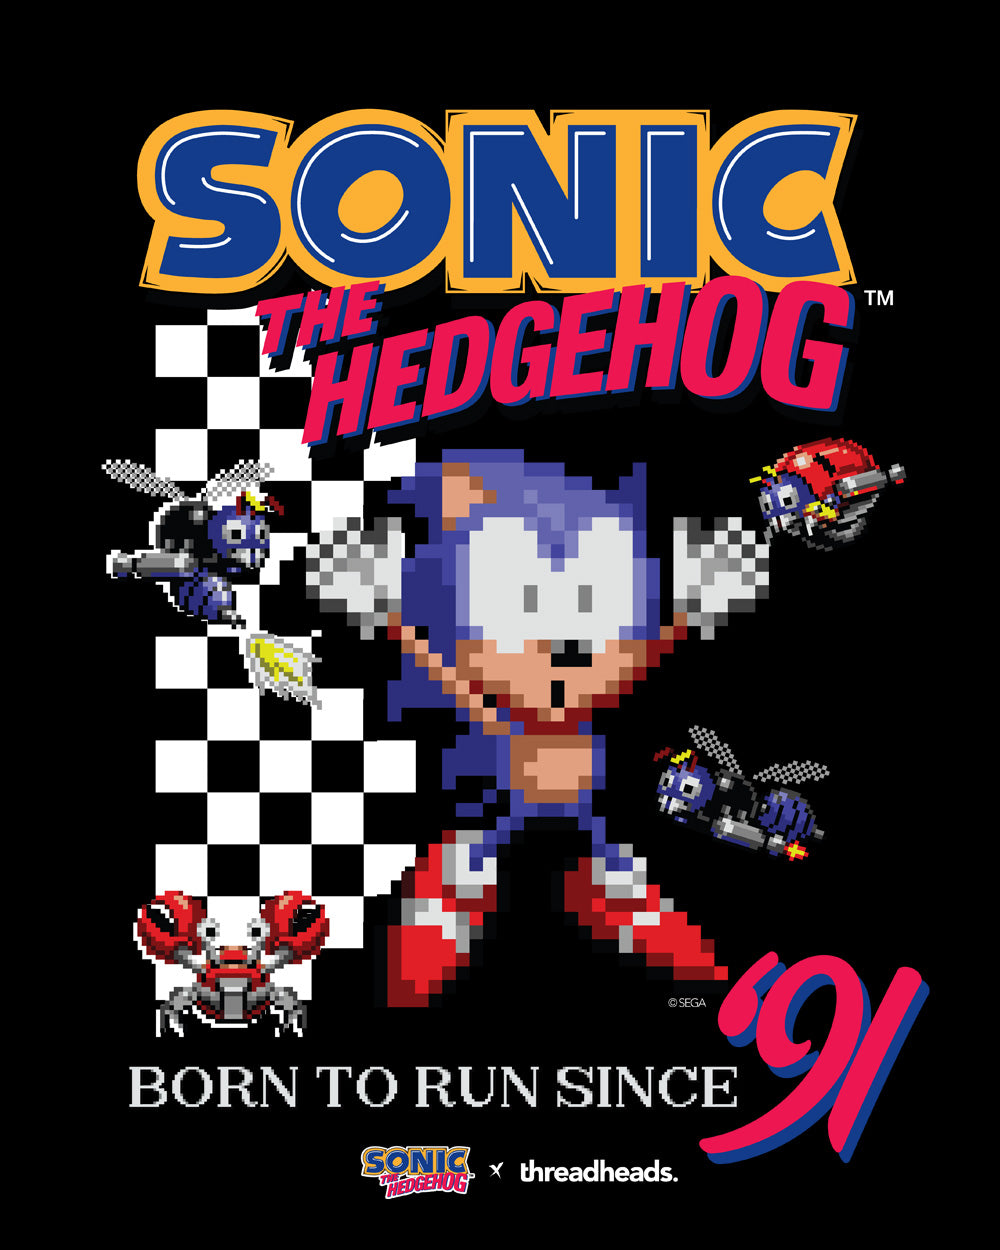 Sonic The Hedgehog Born To Run Since '91 90s Video Game Cartridge Console Geek Nerd Officially Licensed SEGA T-Shirt